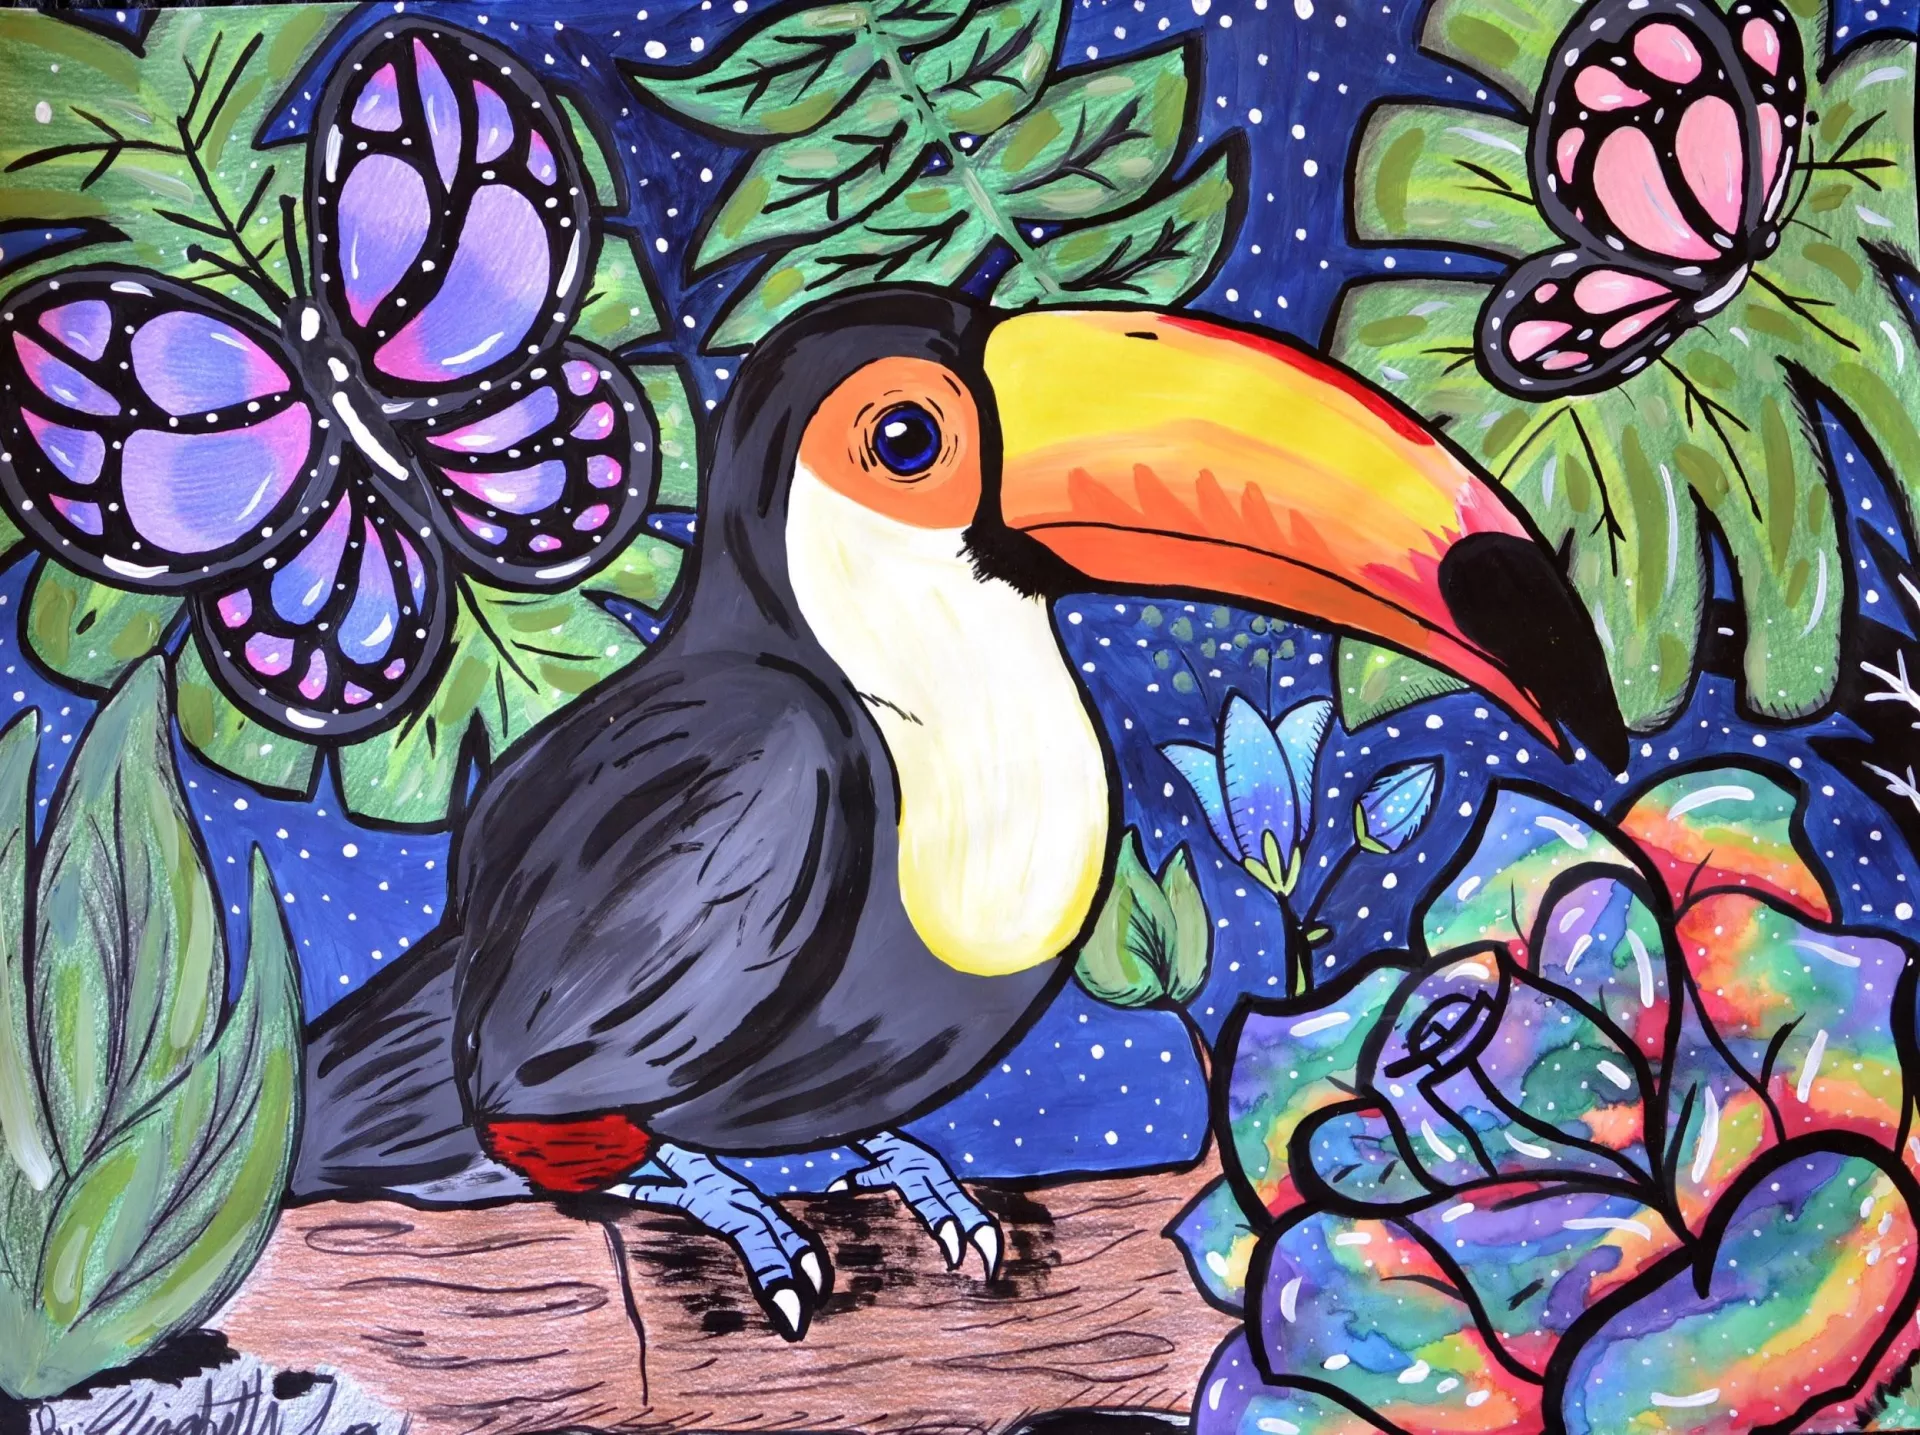 A brightly painted larger-than-life Toucan is the emphasis of this piece.  It sits perched on a log surrounded by foliage, flowers, butterflies, and a night sky full of stars.  Elizabeth used watercolors to blend vibrant hues, using a brush to add highlights and lowlights and colored pencils to layer color and texture onto these natural forms.